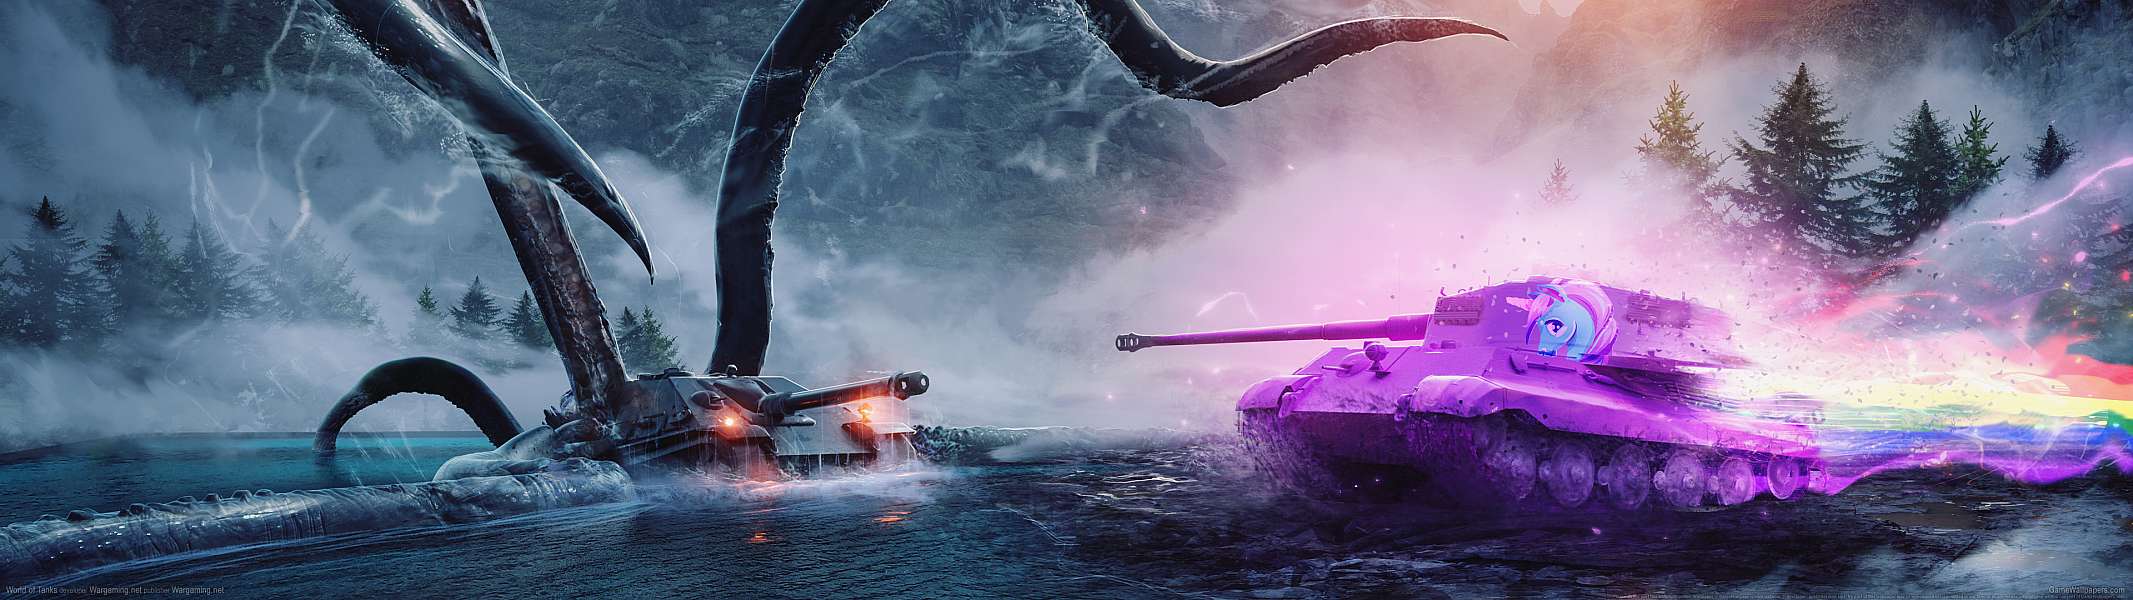 World of Tanks dual screen wallpaper or background